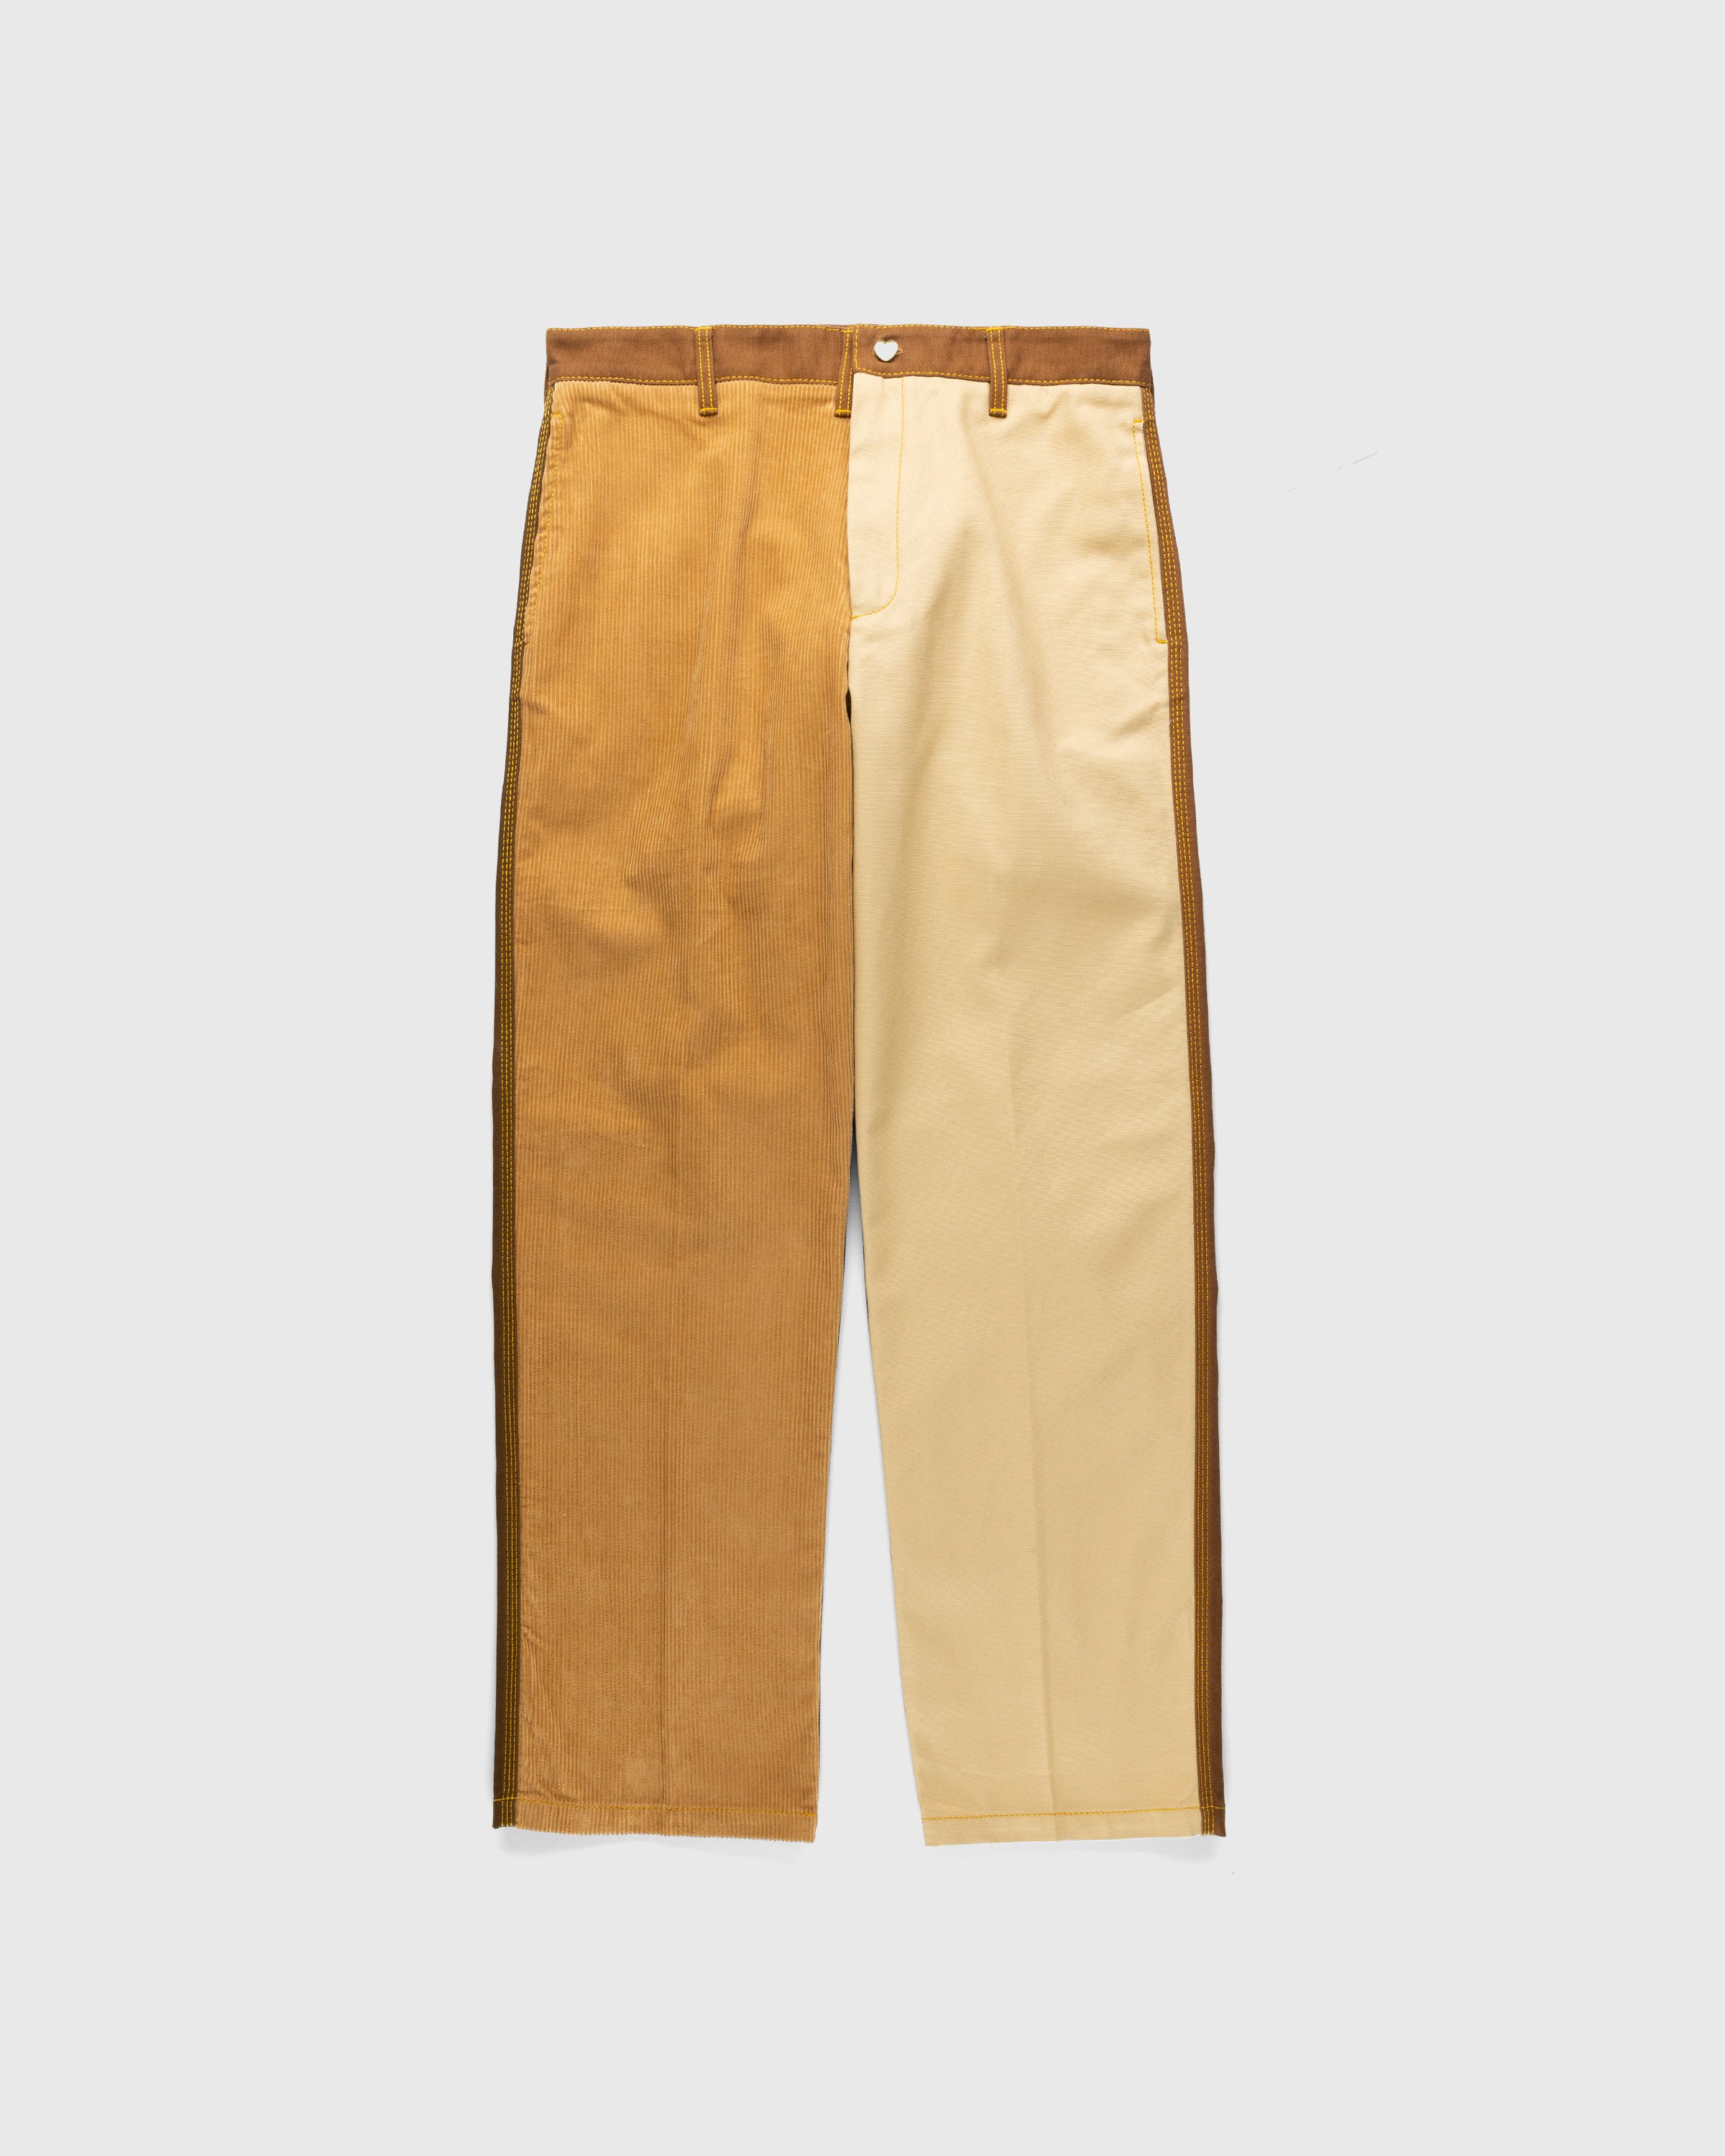 Marni x Carhartt WIP - Colorblocked Trousers Brown - Clothing - Brown - Image 1